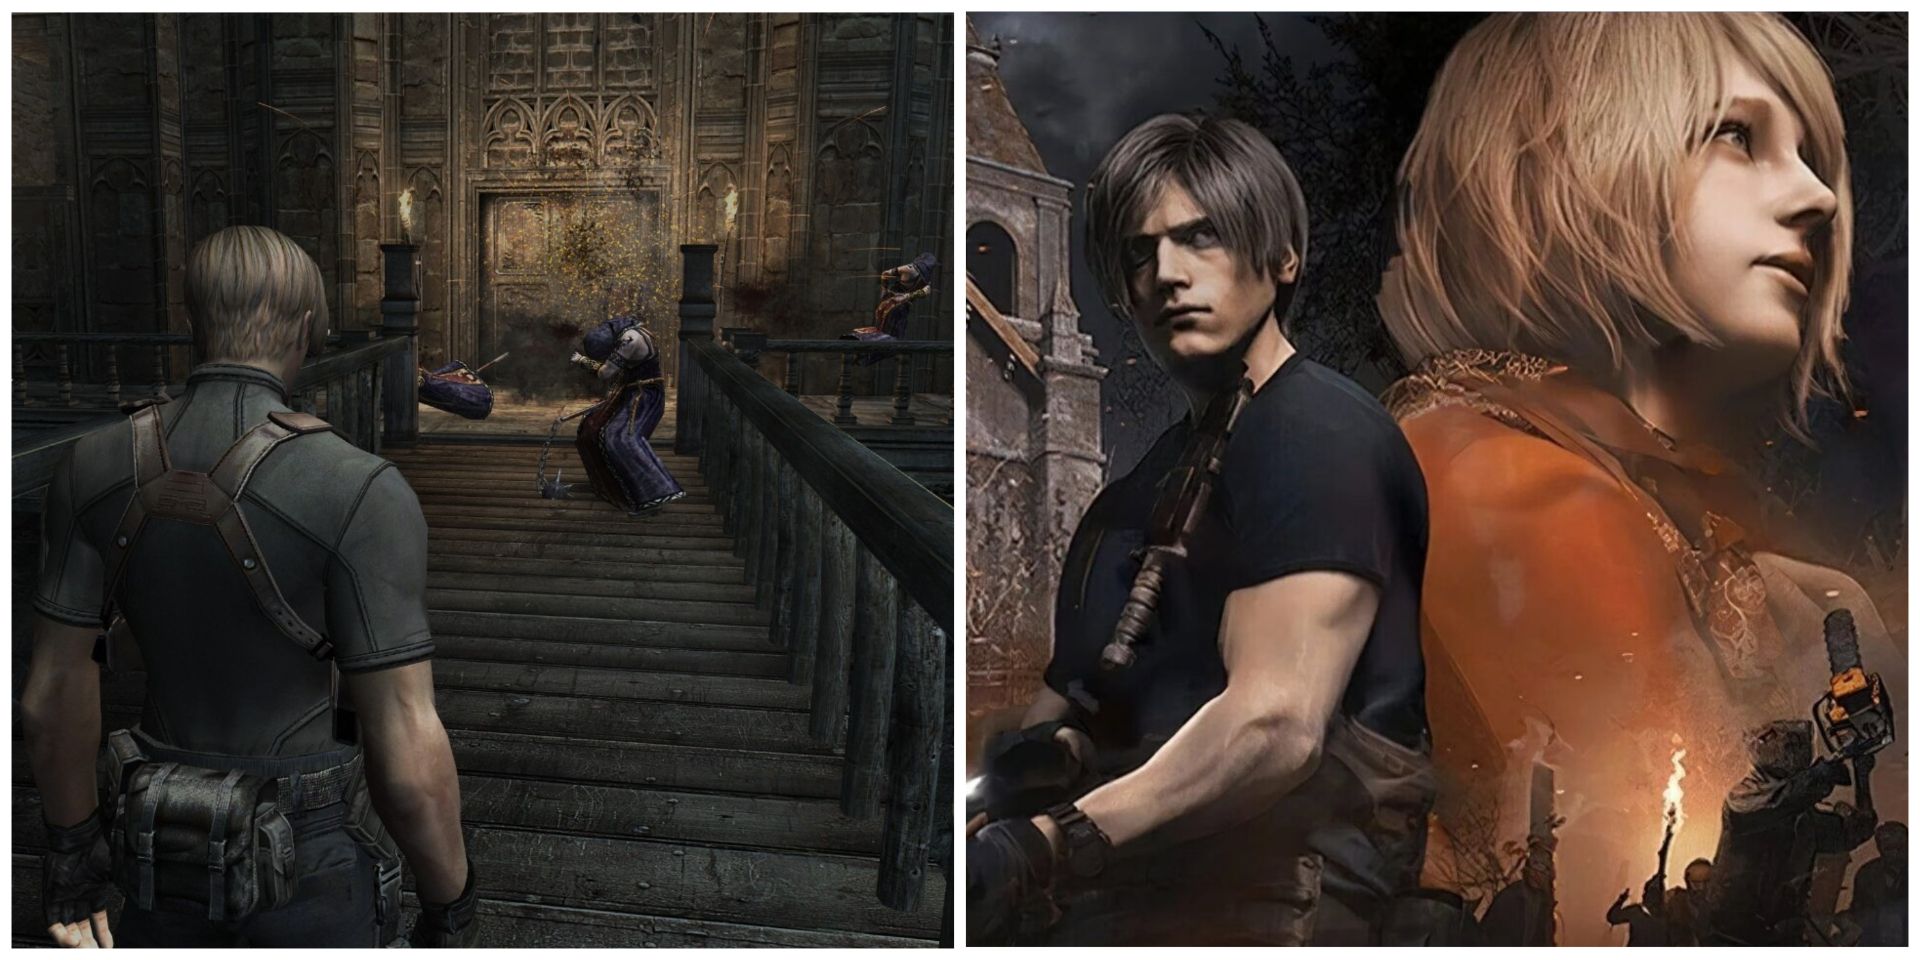 Things The Original Resident Evil 4 Does Better Than The Remake